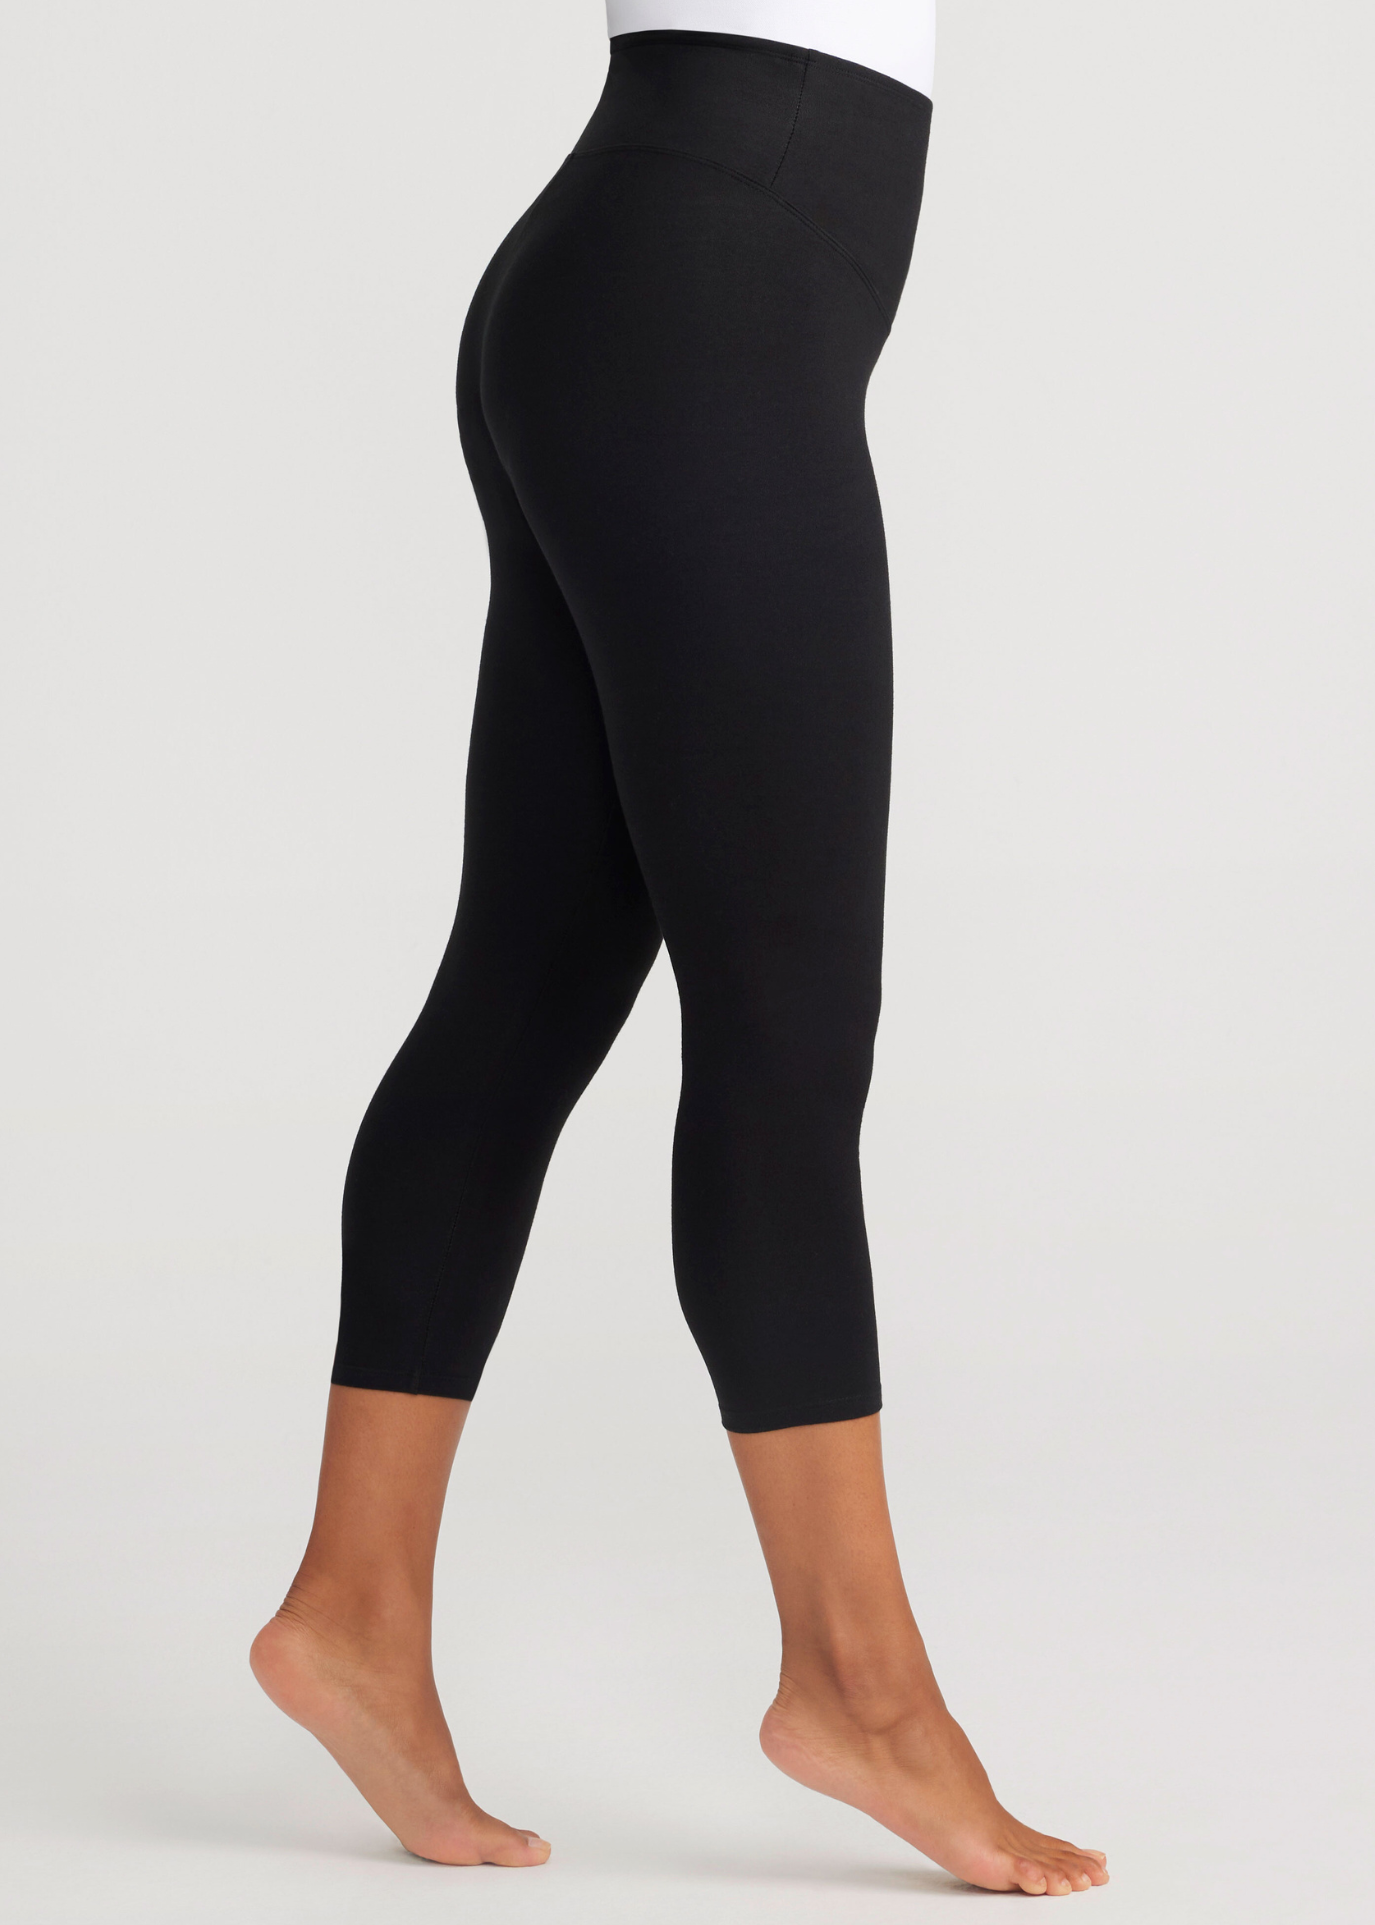 Gloria 7/8 - Stretch | Legging Yummie Cotton Shaping Ankle